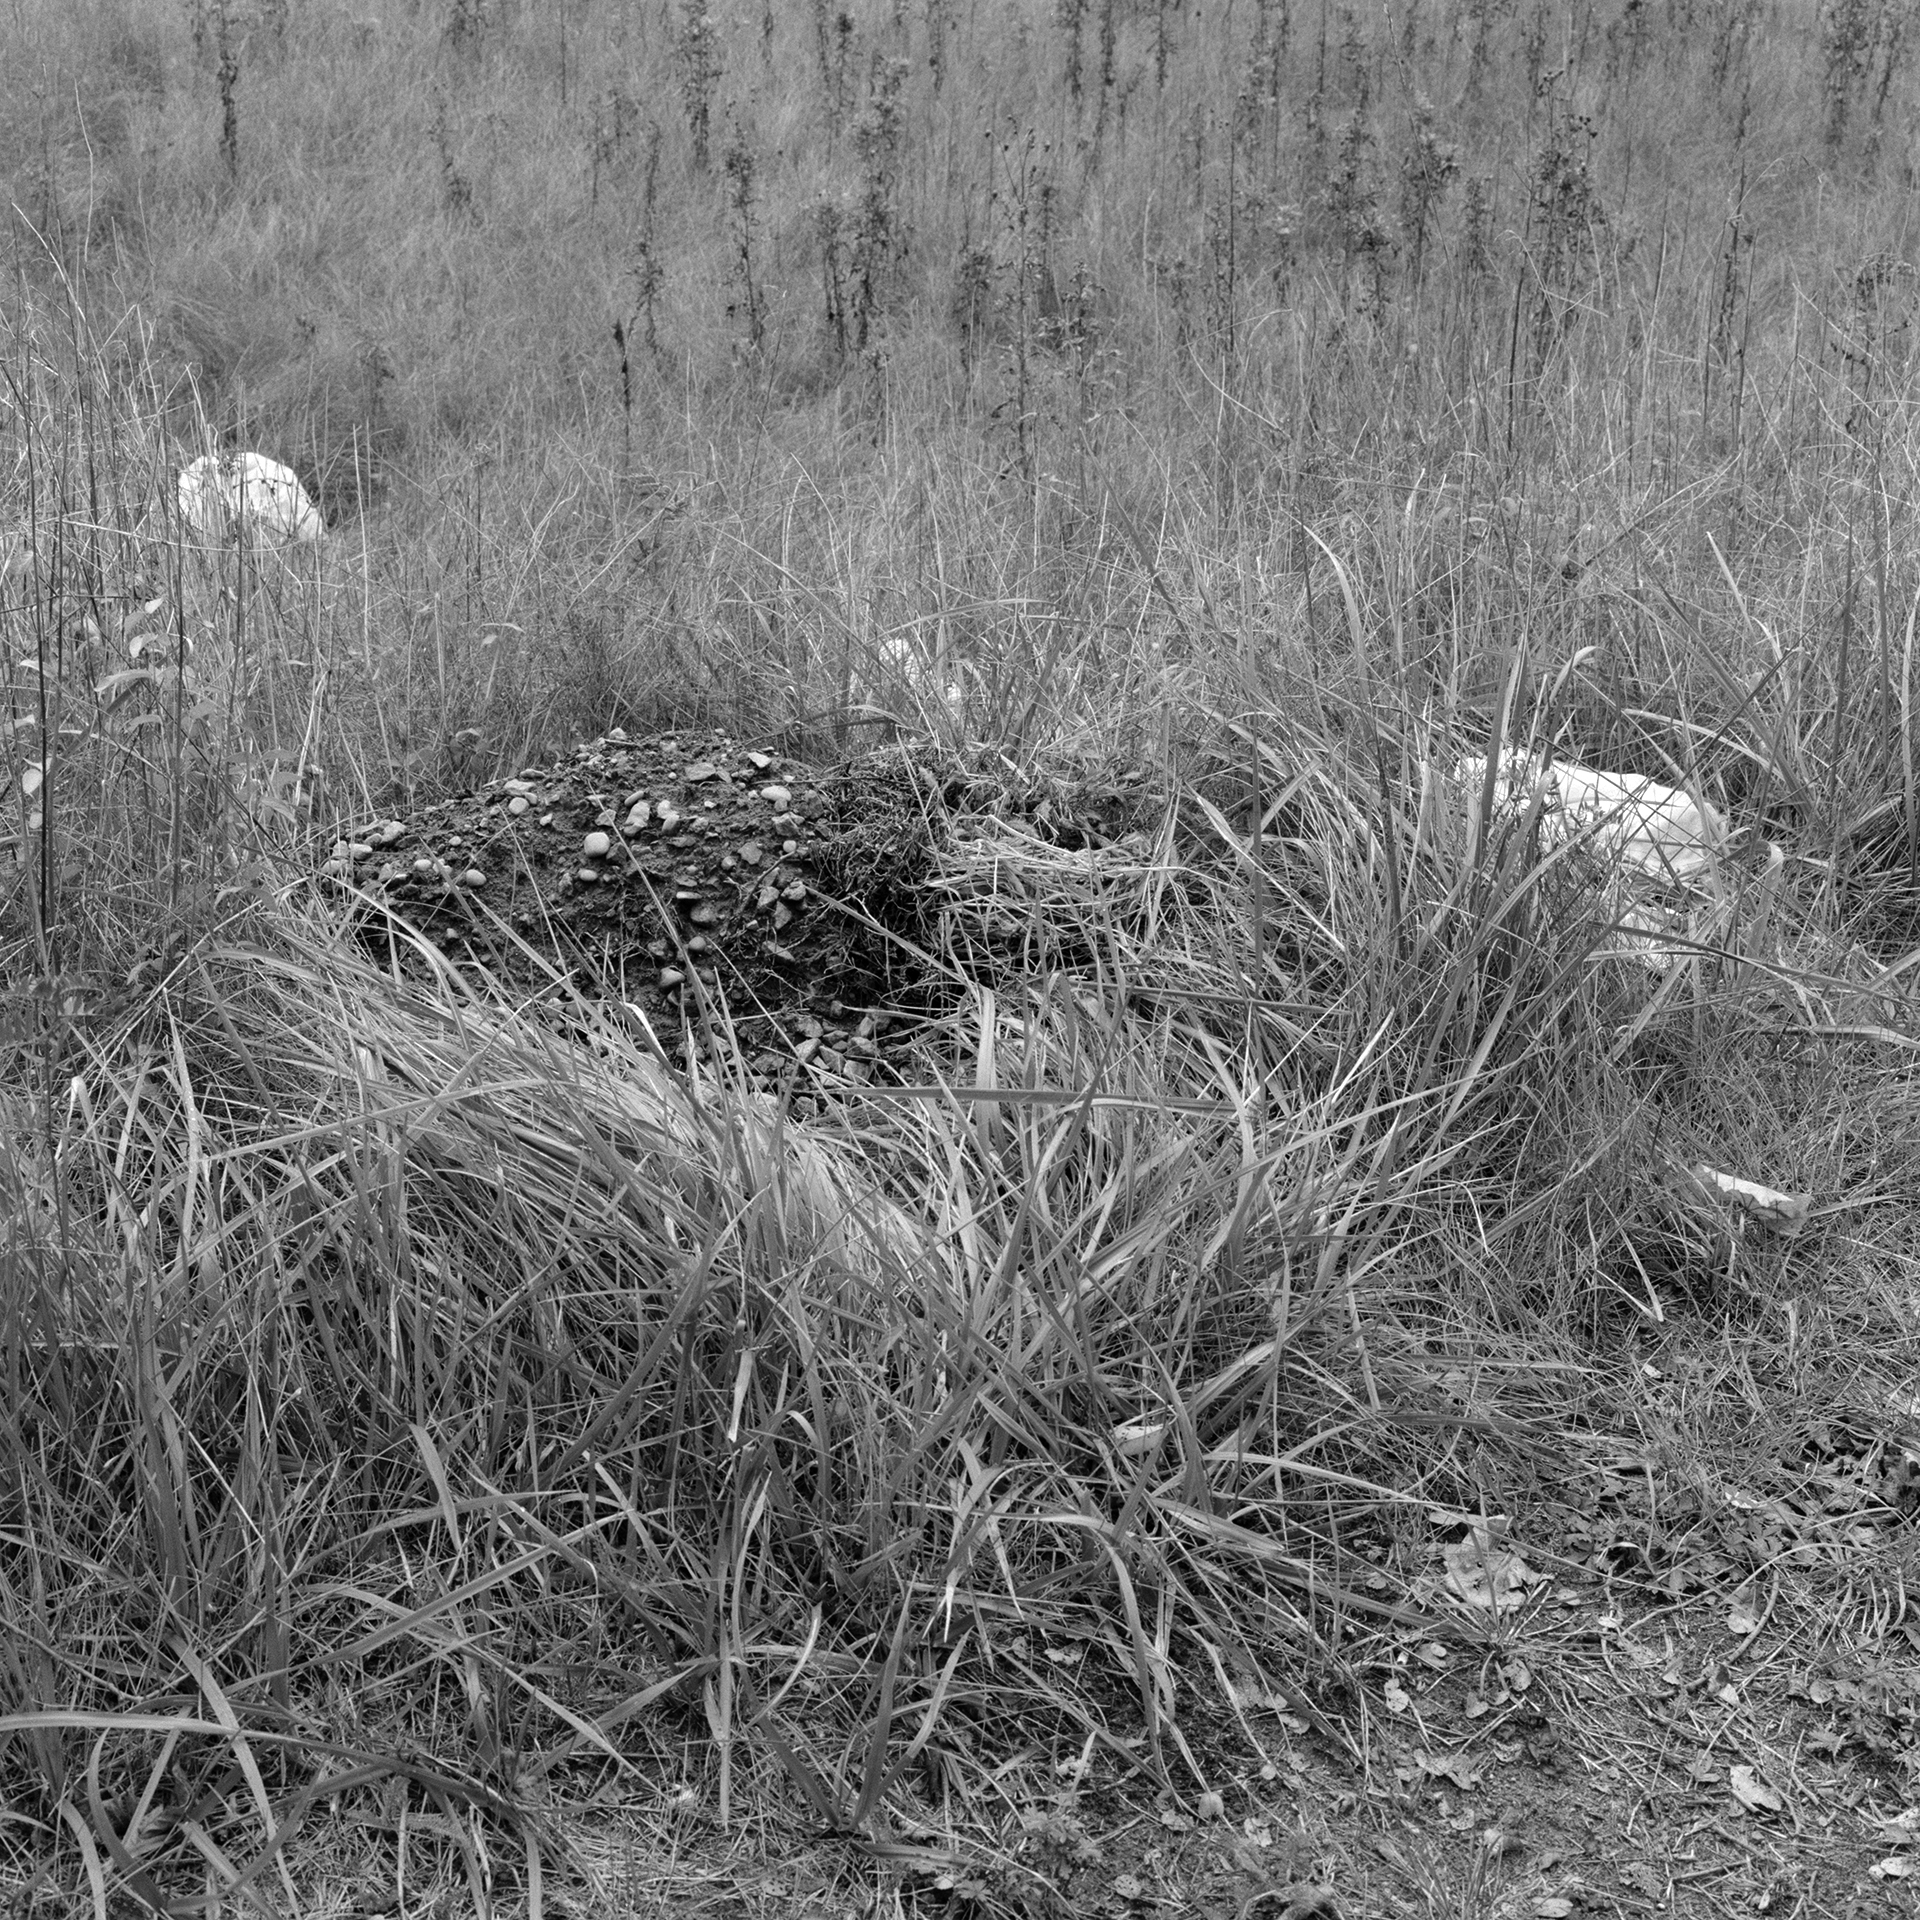 Where The River Runs # 10: A square black and white photograph of a pile of dirt and rocks surrounded by long wild grass and foliage. Next to and behind the bank, two plastic bags sit, blending into the landscape. The long grass and vegetation extend beyond the top of the frame.